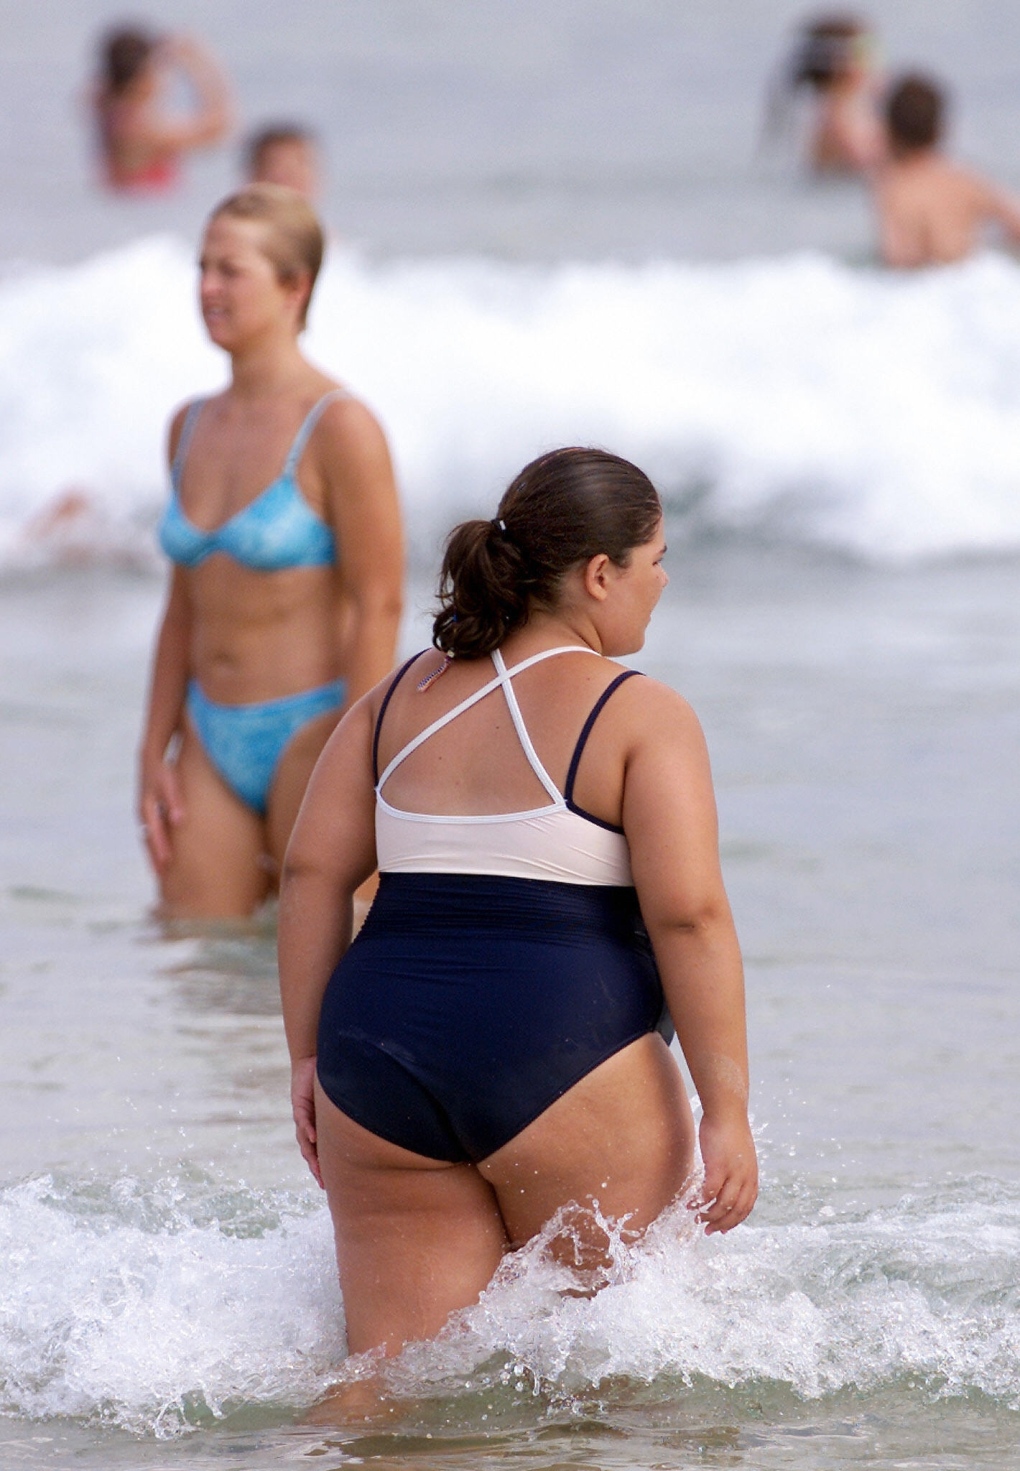 Overweight, obese woman at the beach